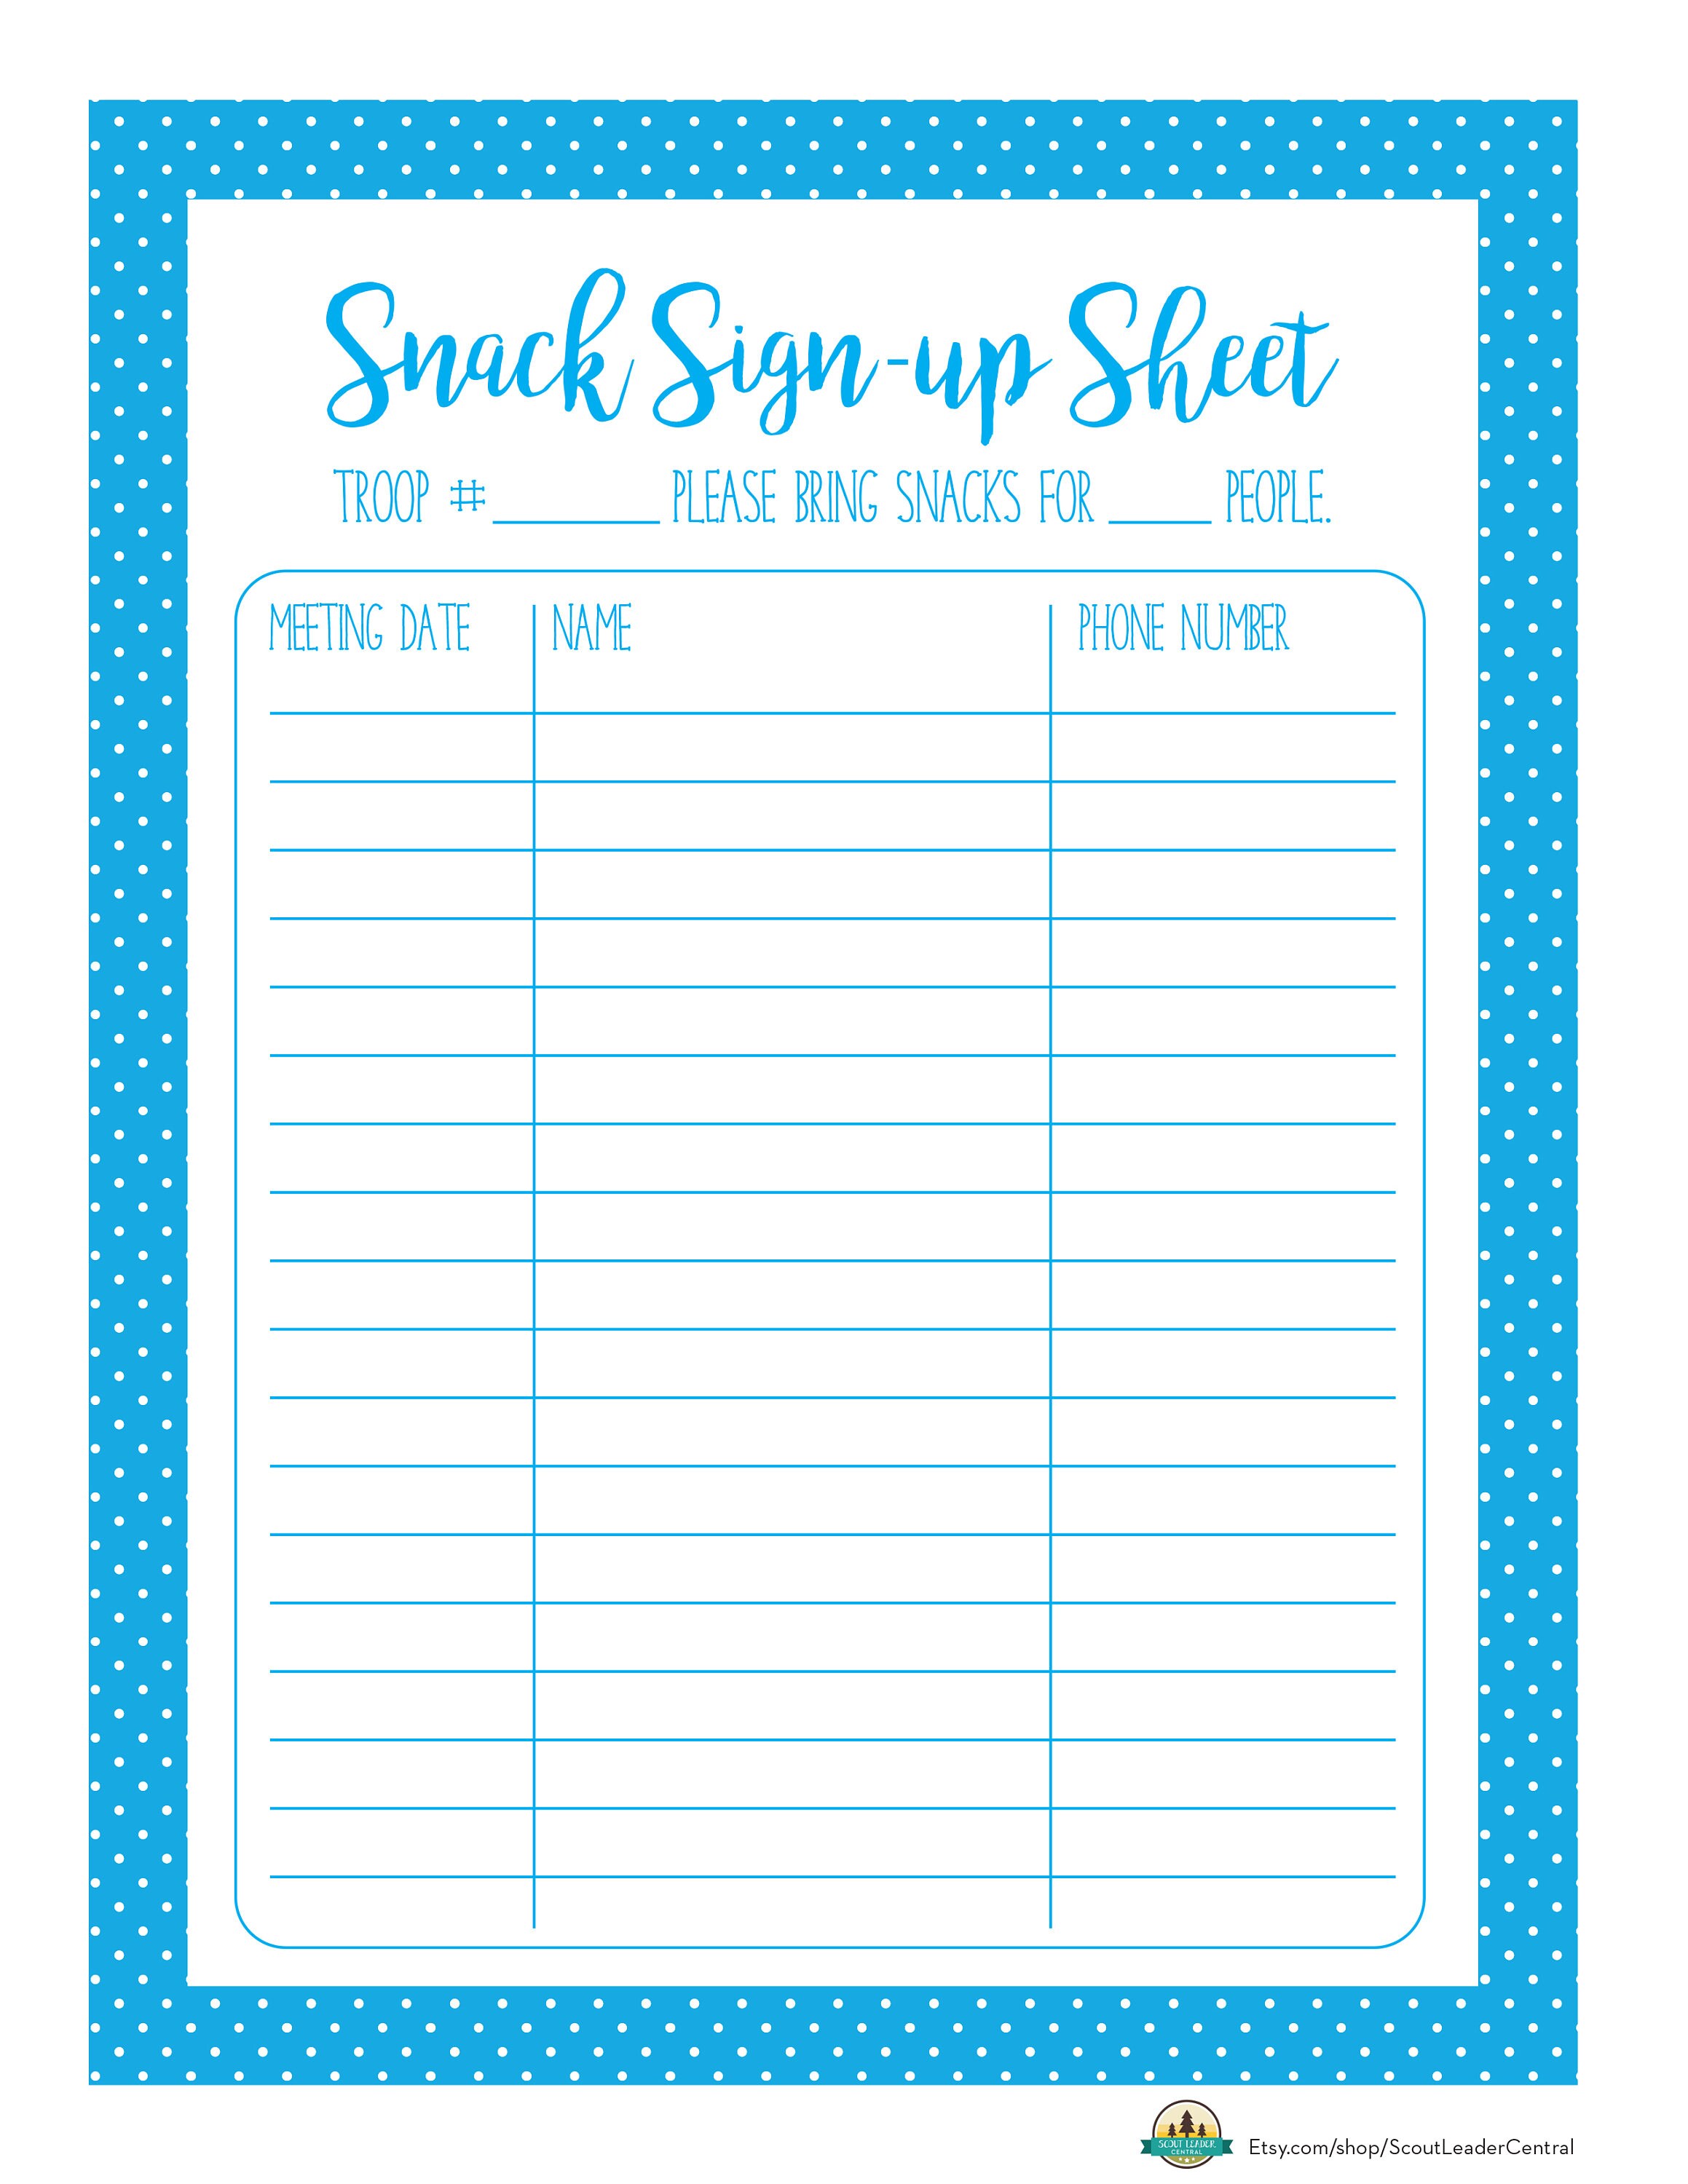 Instant Download Snack Sign up Sheet In Bright Blue